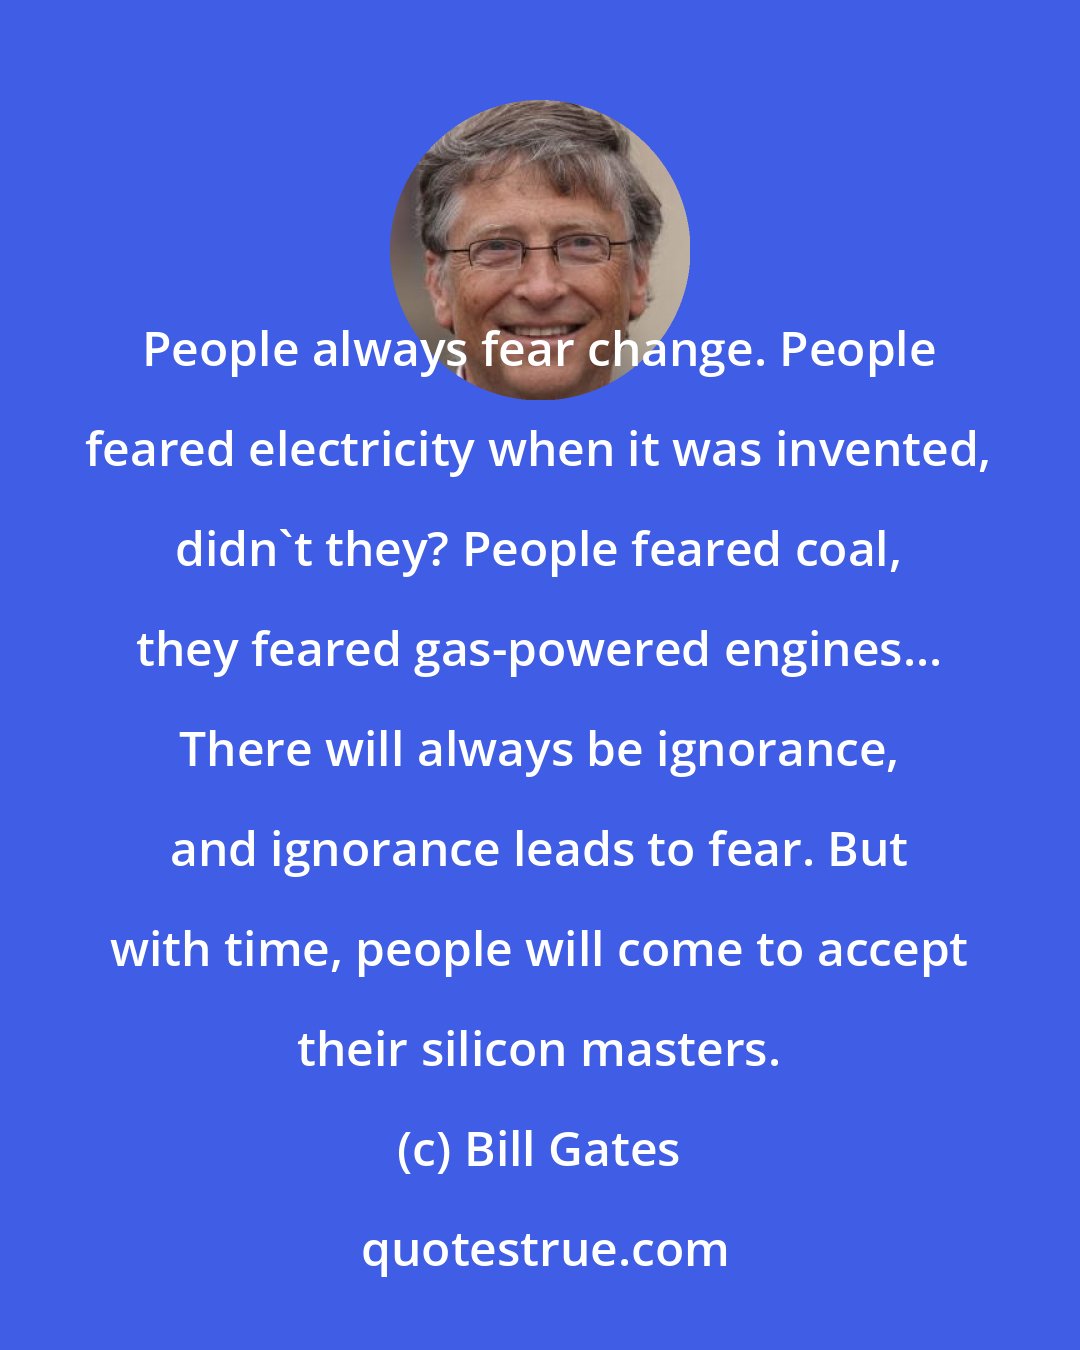 Bill Gates: People always fear change. People feared electricity when it was invented, didn't they? People feared coal, they feared gas-powered engines... There will always be ignorance, and ignorance leads to fear. But with time, people will come to accept their silicon masters.